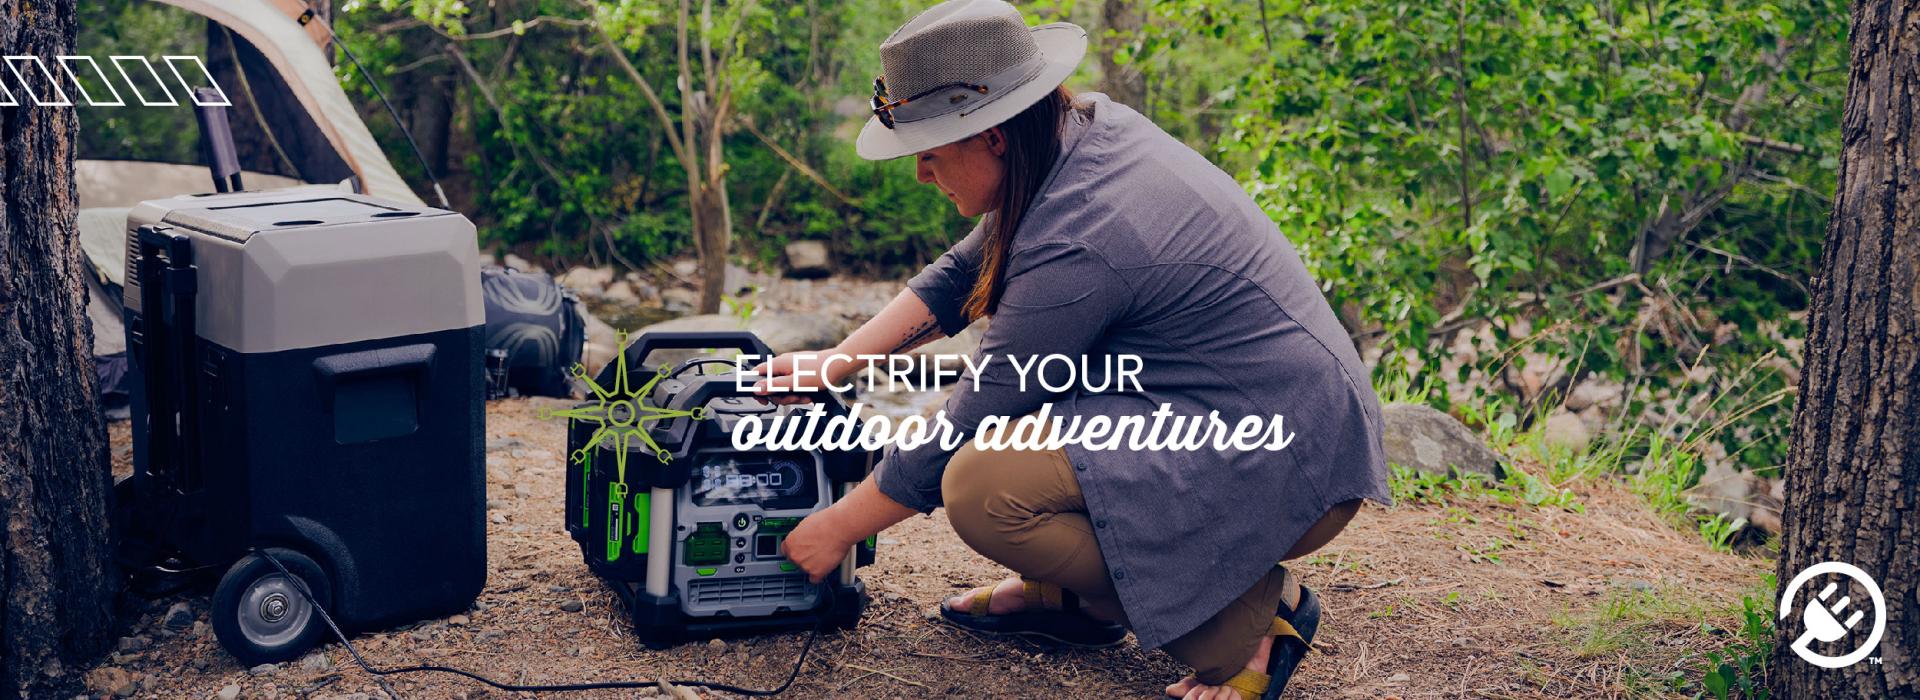 How to Electrify Your Outdoor Camping Adventures